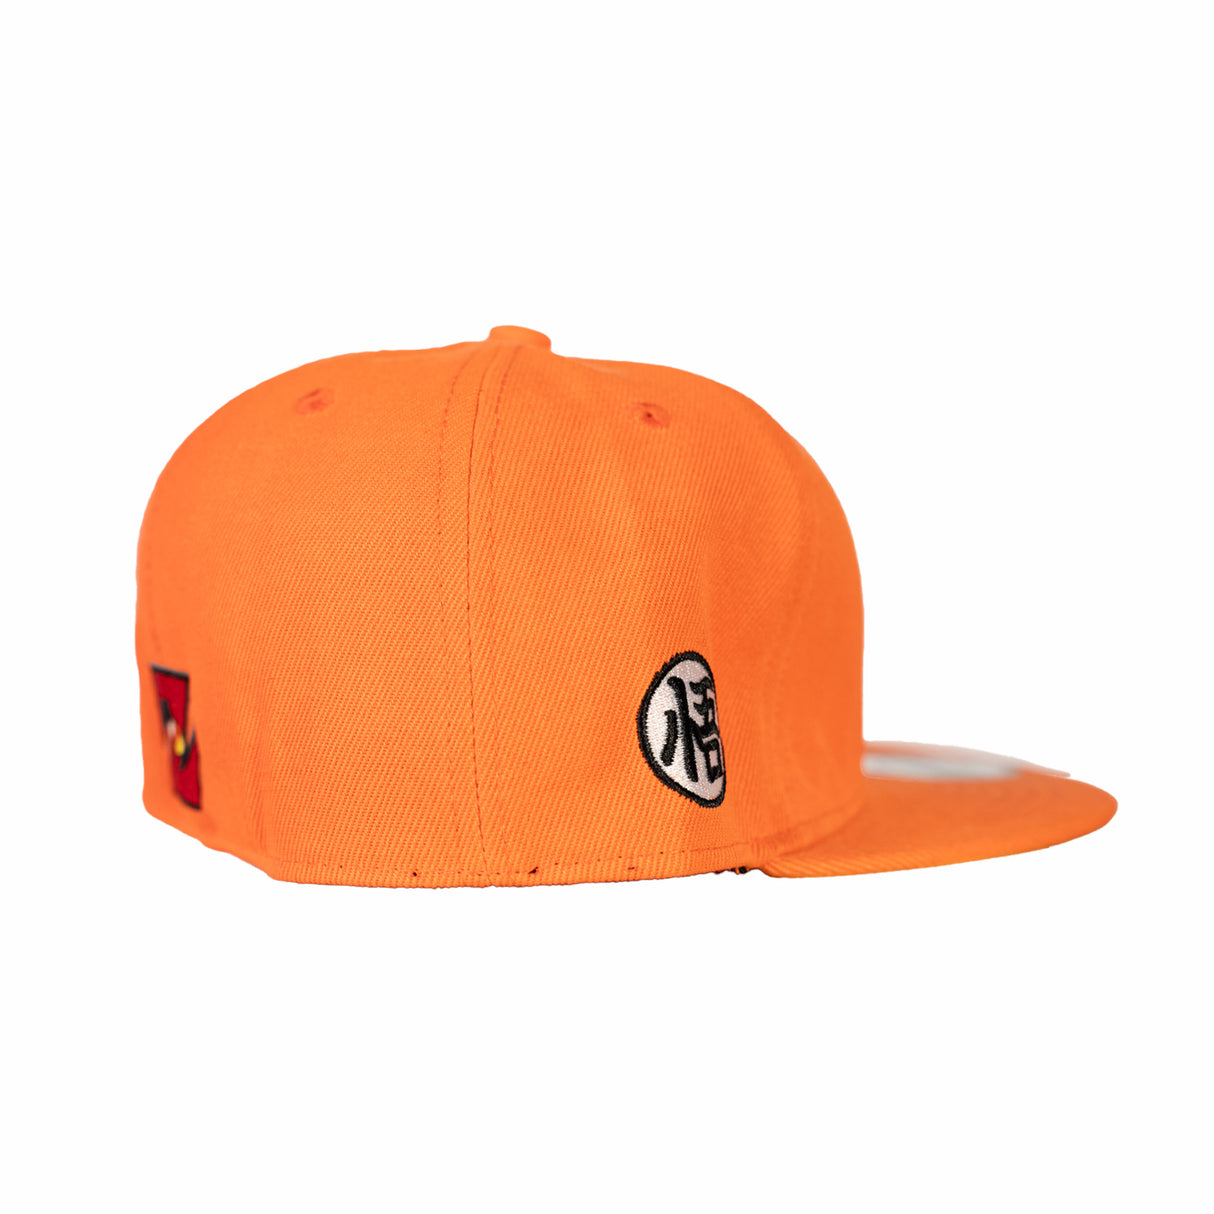 ORANGE  DRAGONBALL Z FITTED HAT